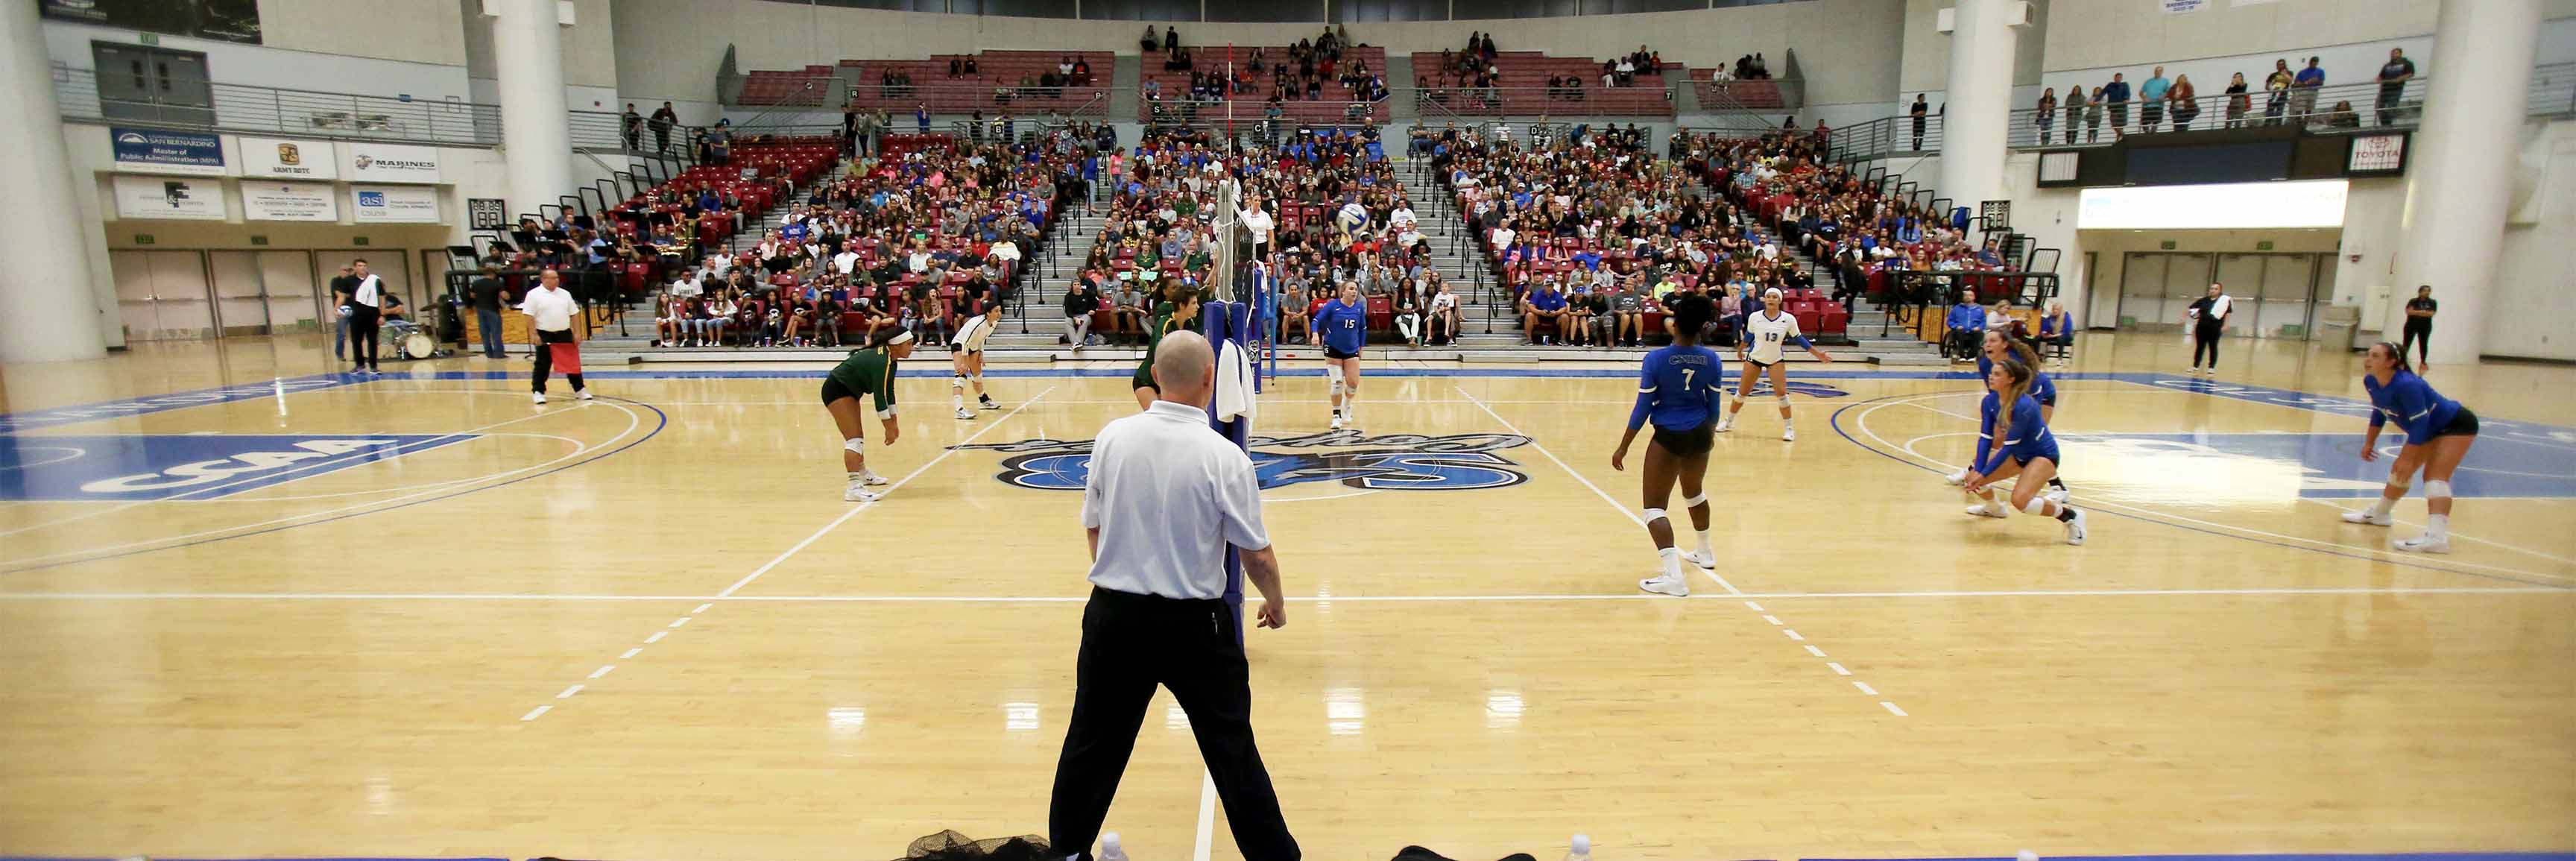 A season best crowd of 852 at Coussoulis Arena watched the women’s volleyball team win its match over regional rival Cal Poly Pomona in an important CCAA game. Photo: Corinne McCurdy/CSUSB